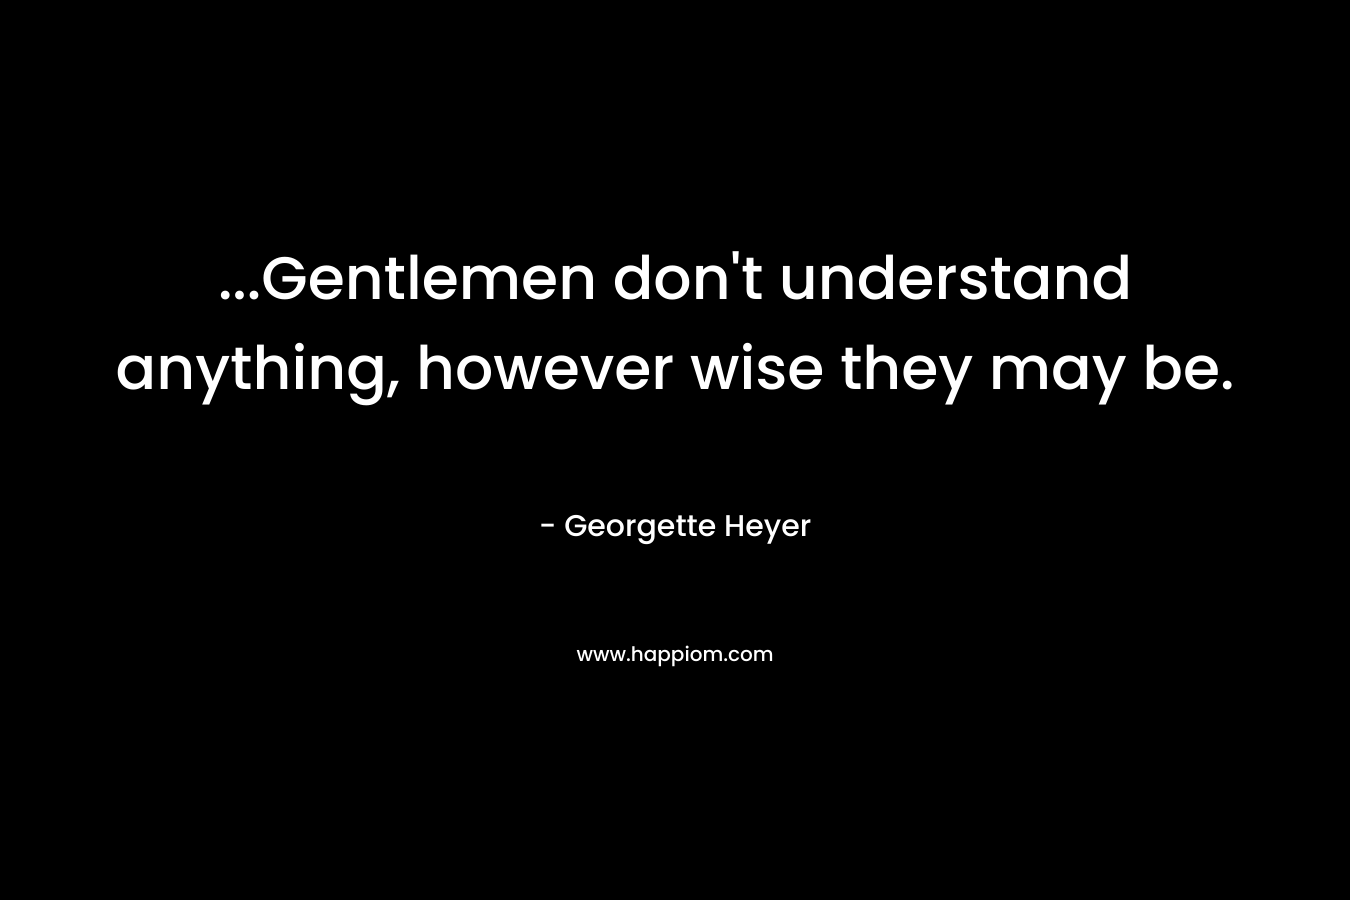 …Gentlemen don’t understand anything, however wise they may be. – Georgette Heyer